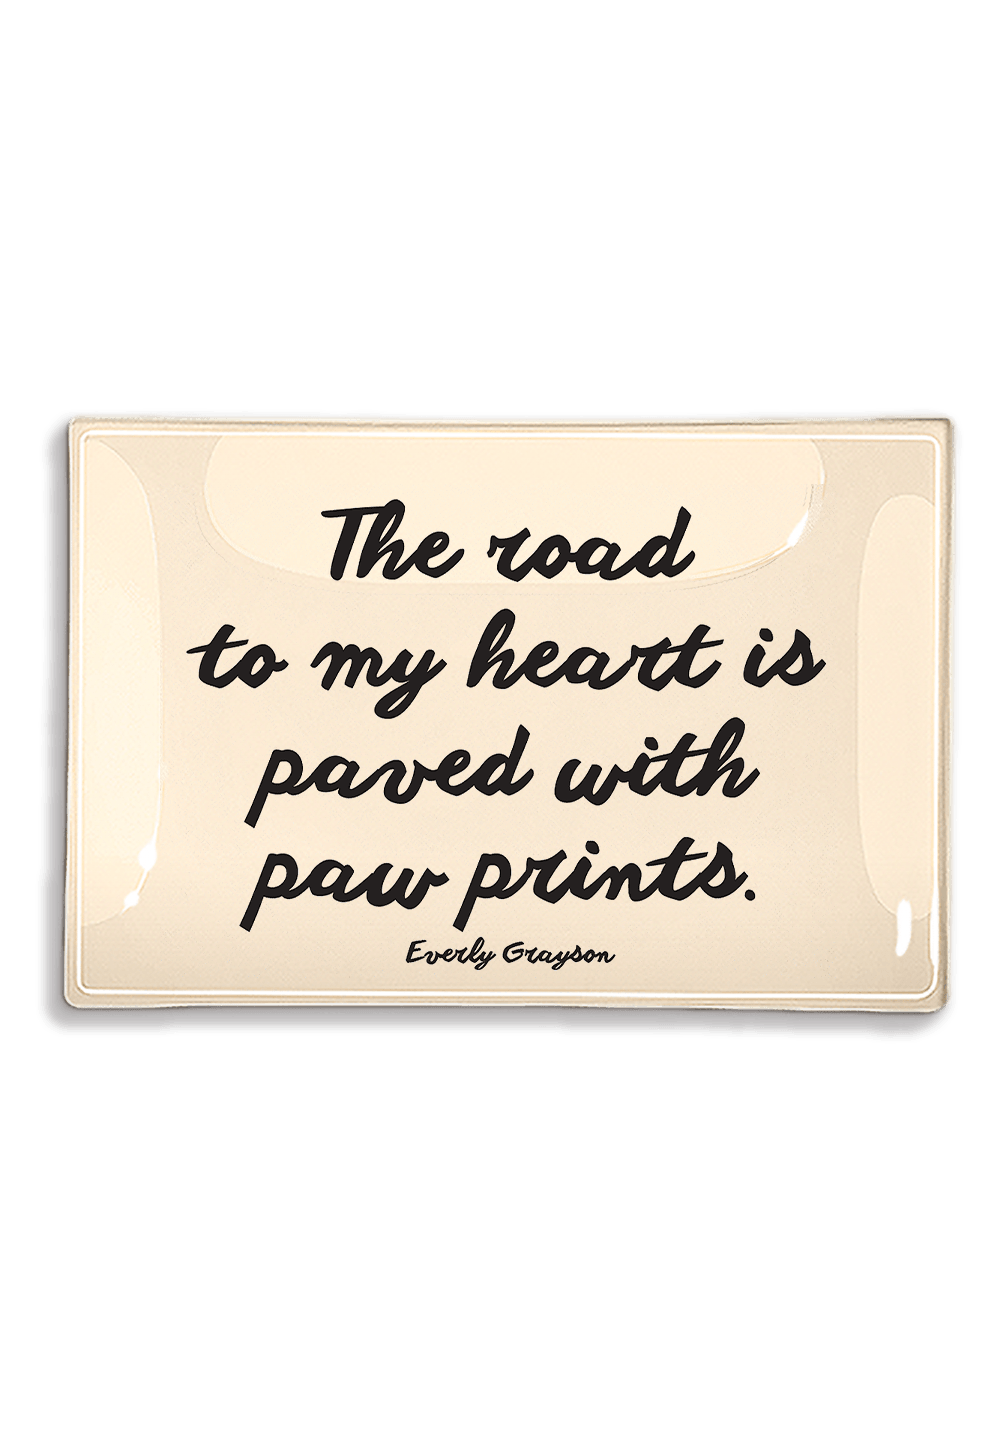 The Road To My Heart Is Paved With Paw Prints Decoupage Glass Tray - Bensgarden.com